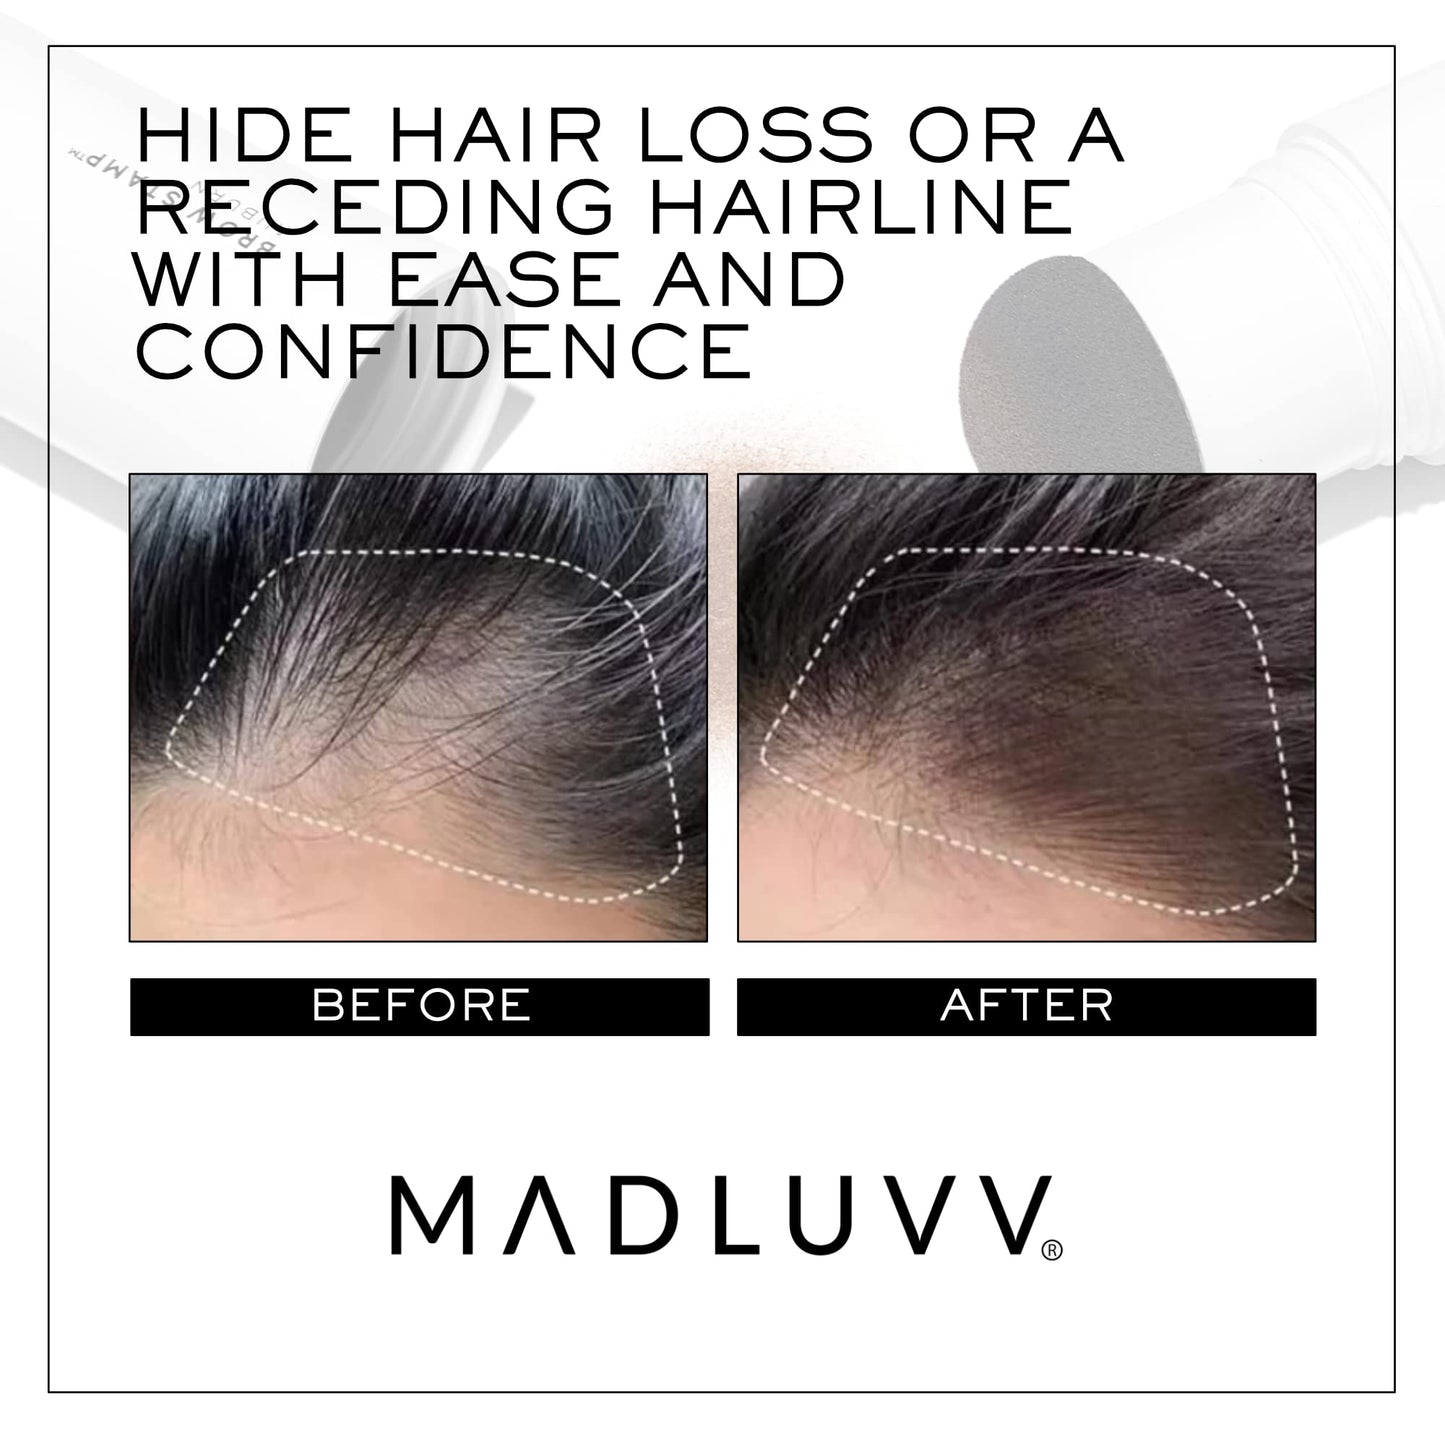 MADLUVV Brow Stamp Refill* - Color Stamp for Brows & Root Touch Up for Women & Men, Instantly Conceal Hair Loss, Grey Hair, Thinning Hair with Stain-Proof/Smudge-Proof Powder Formula (Medium Brown)